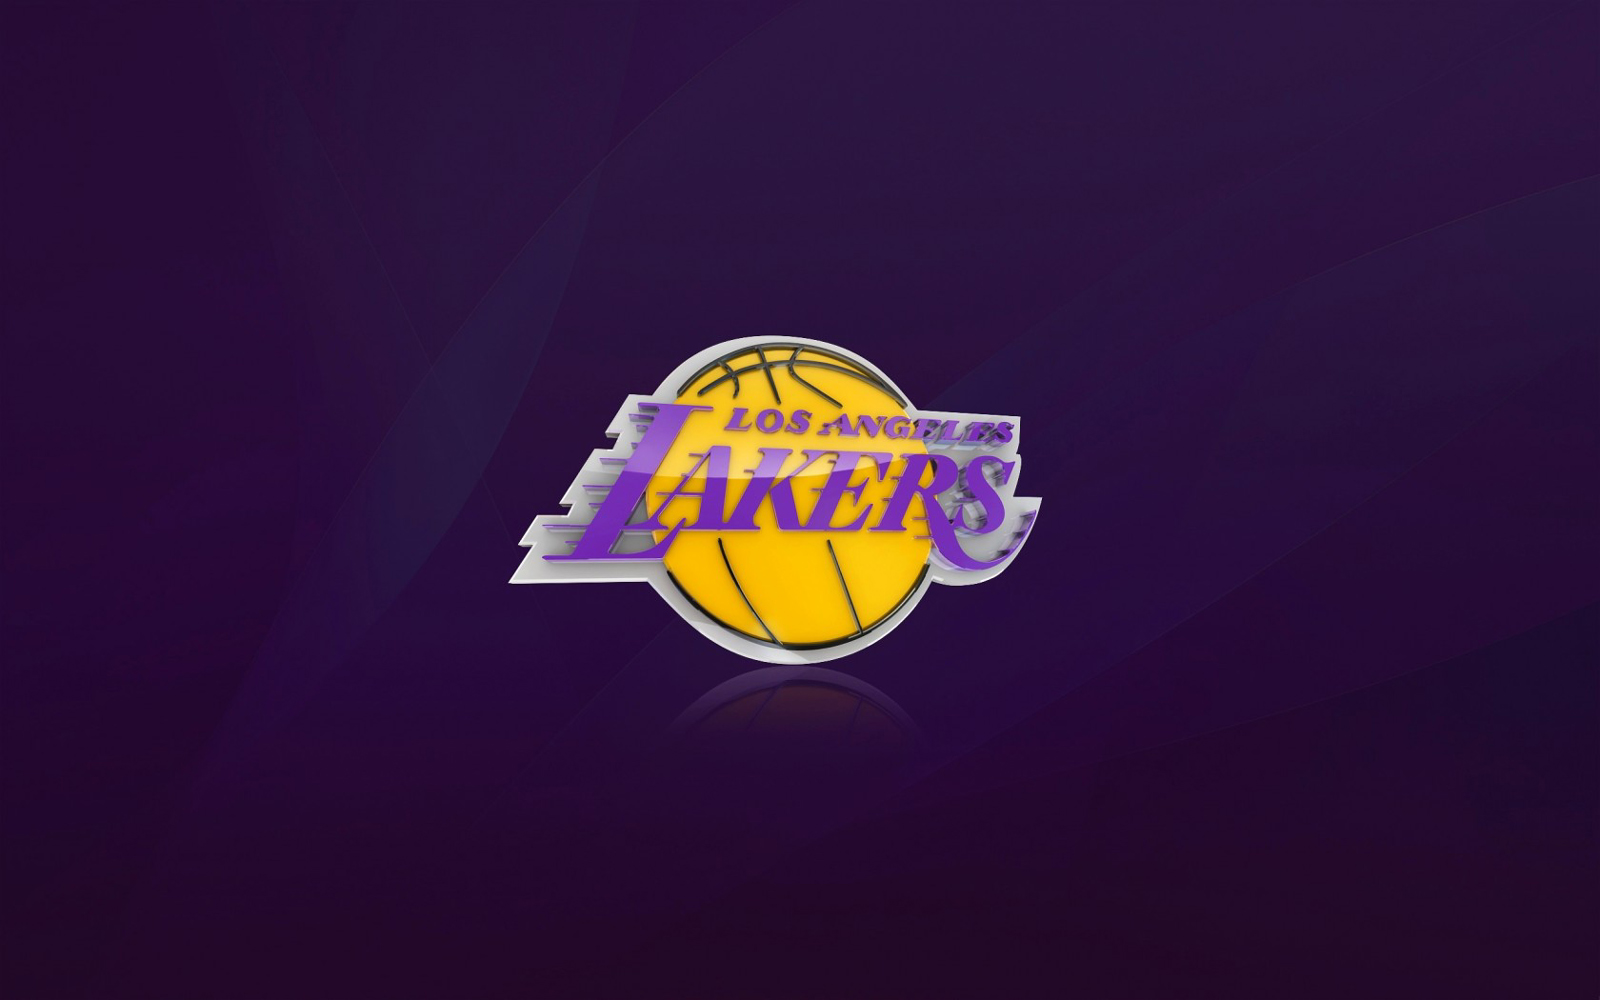 Gallery For Gt Lakers Logo HD